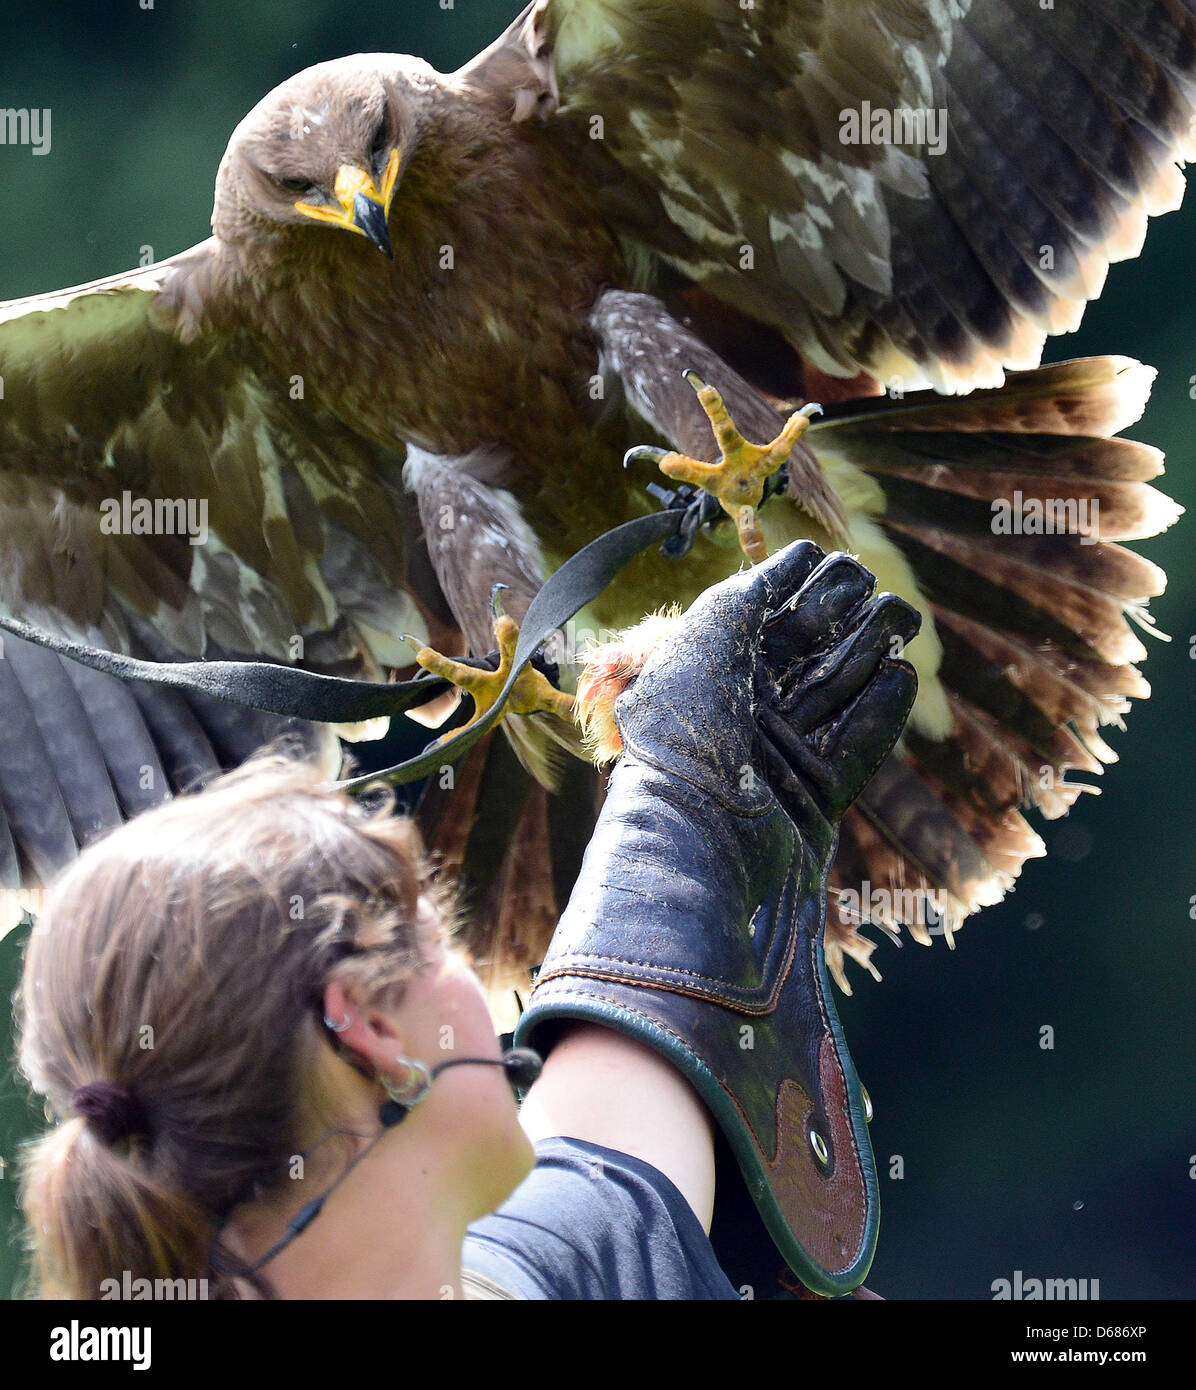 Eagle Louis and falconer Vanessa present their show at the Wisent enclosure in Springe, Germany, 03 July 2012.   Photo: Peter Steffen Stock Photo